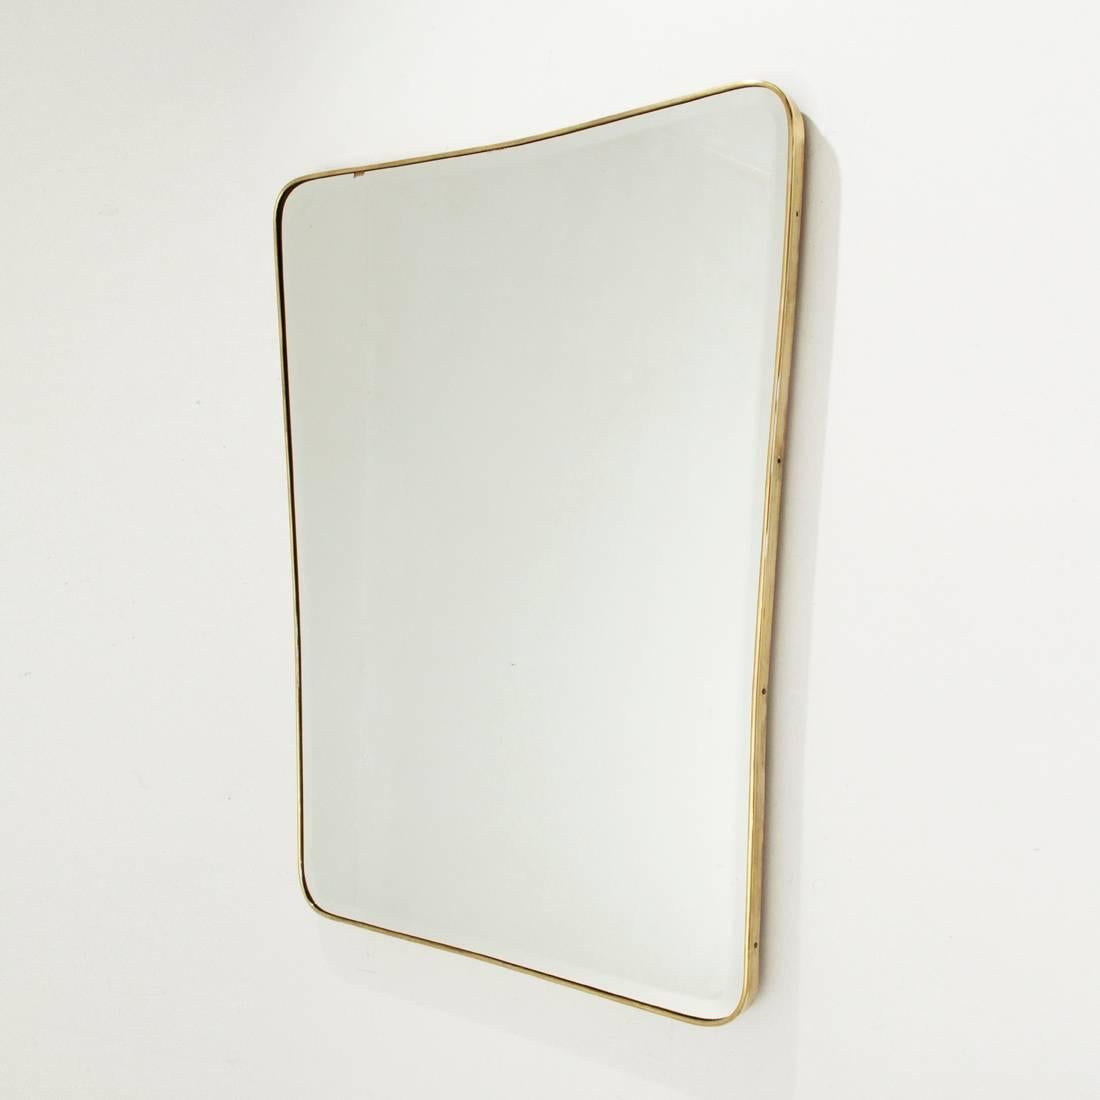 Italian mirror production of 1950s.
Wooden frame, mirrored glass with bevelled edges and brass frame.
Good general conditions, some film shadows on the mirror, frame cut into the lower edge, visible in the picture.

Dimensions: Width 79 cm,